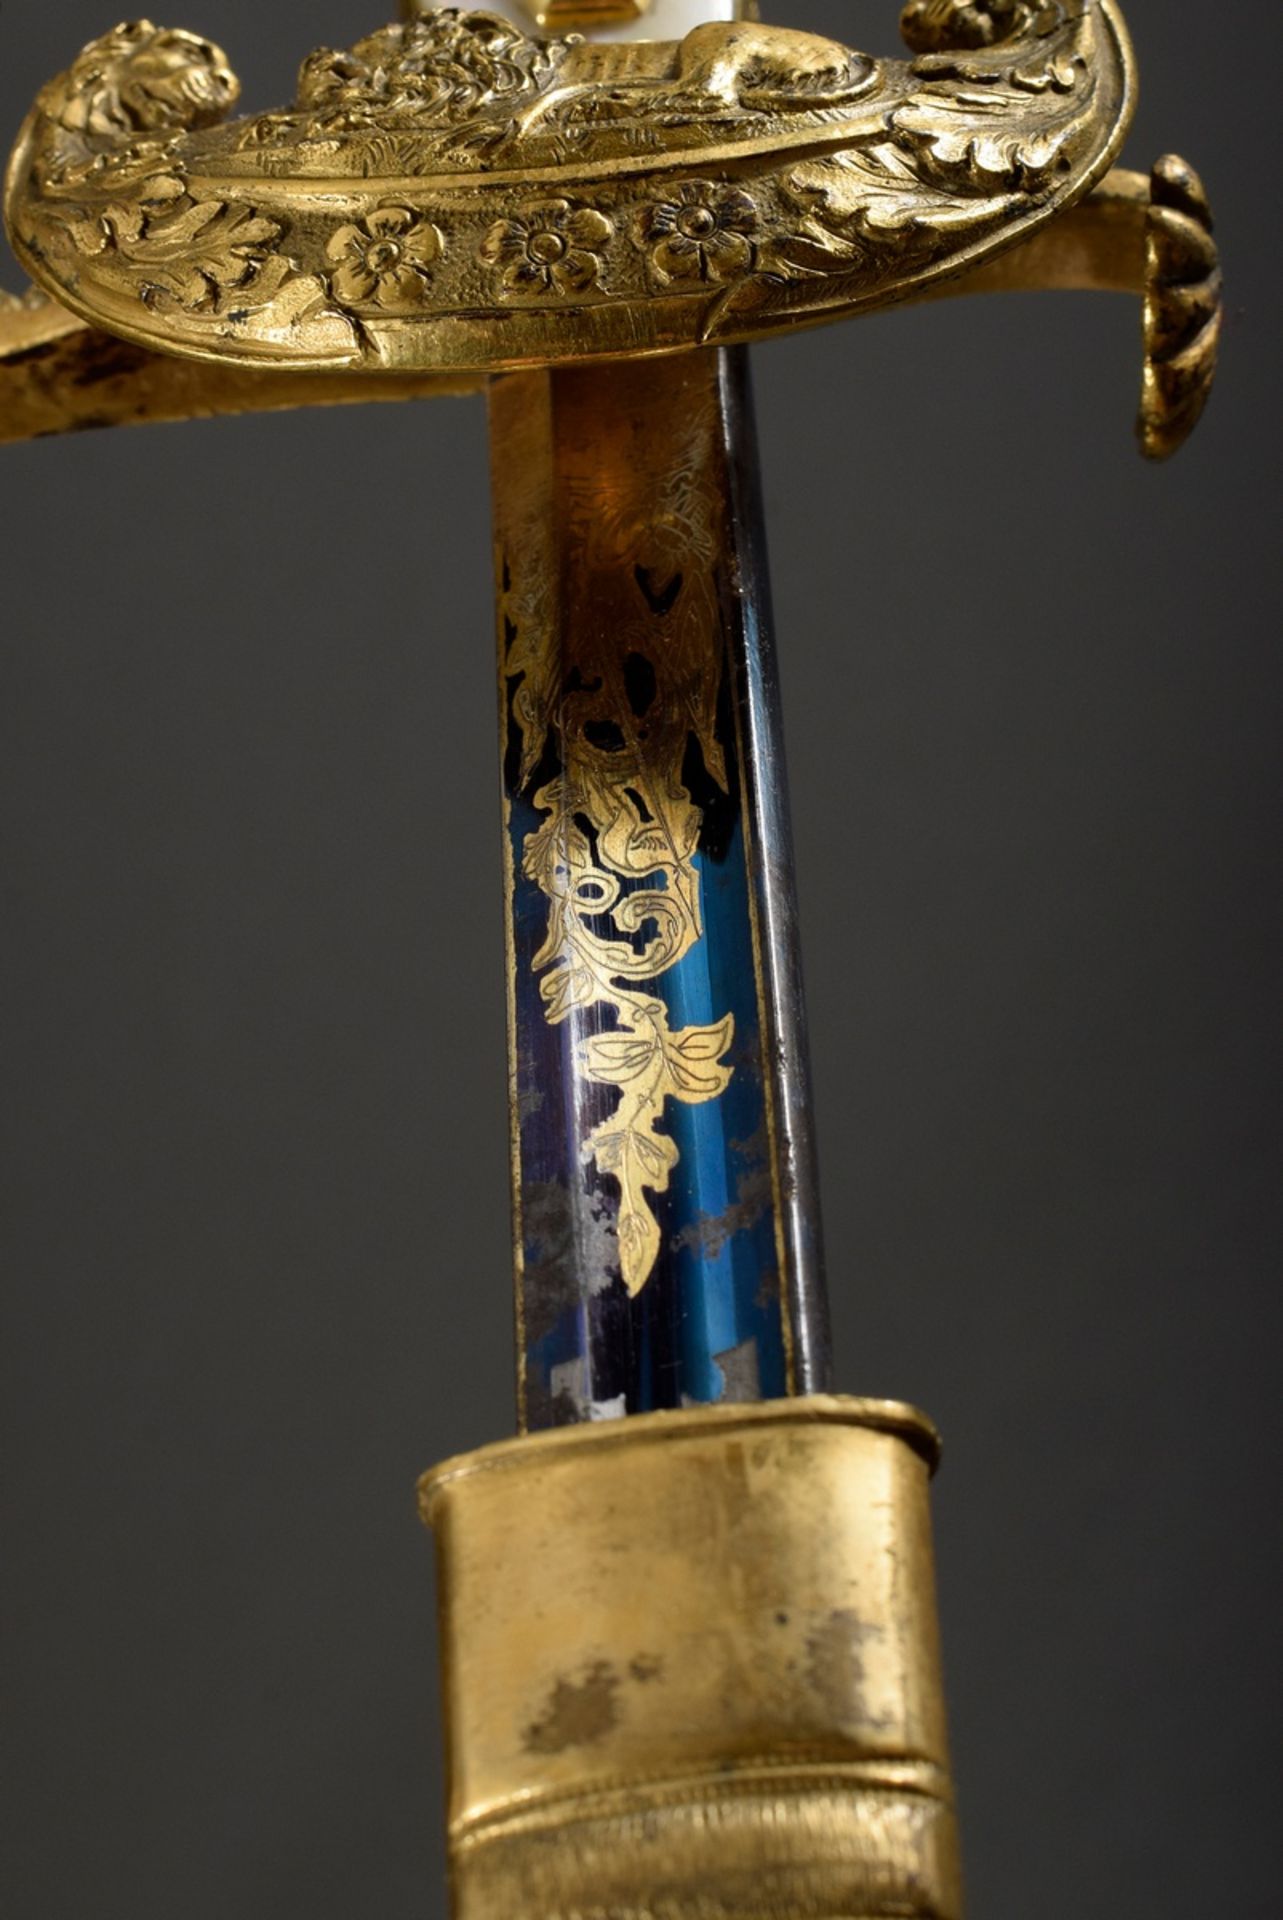 Bavarian civil servant's sword from the reign of King Ludwig I (1825-1848) or King Ludwig II (1864- - Image 11 of 11